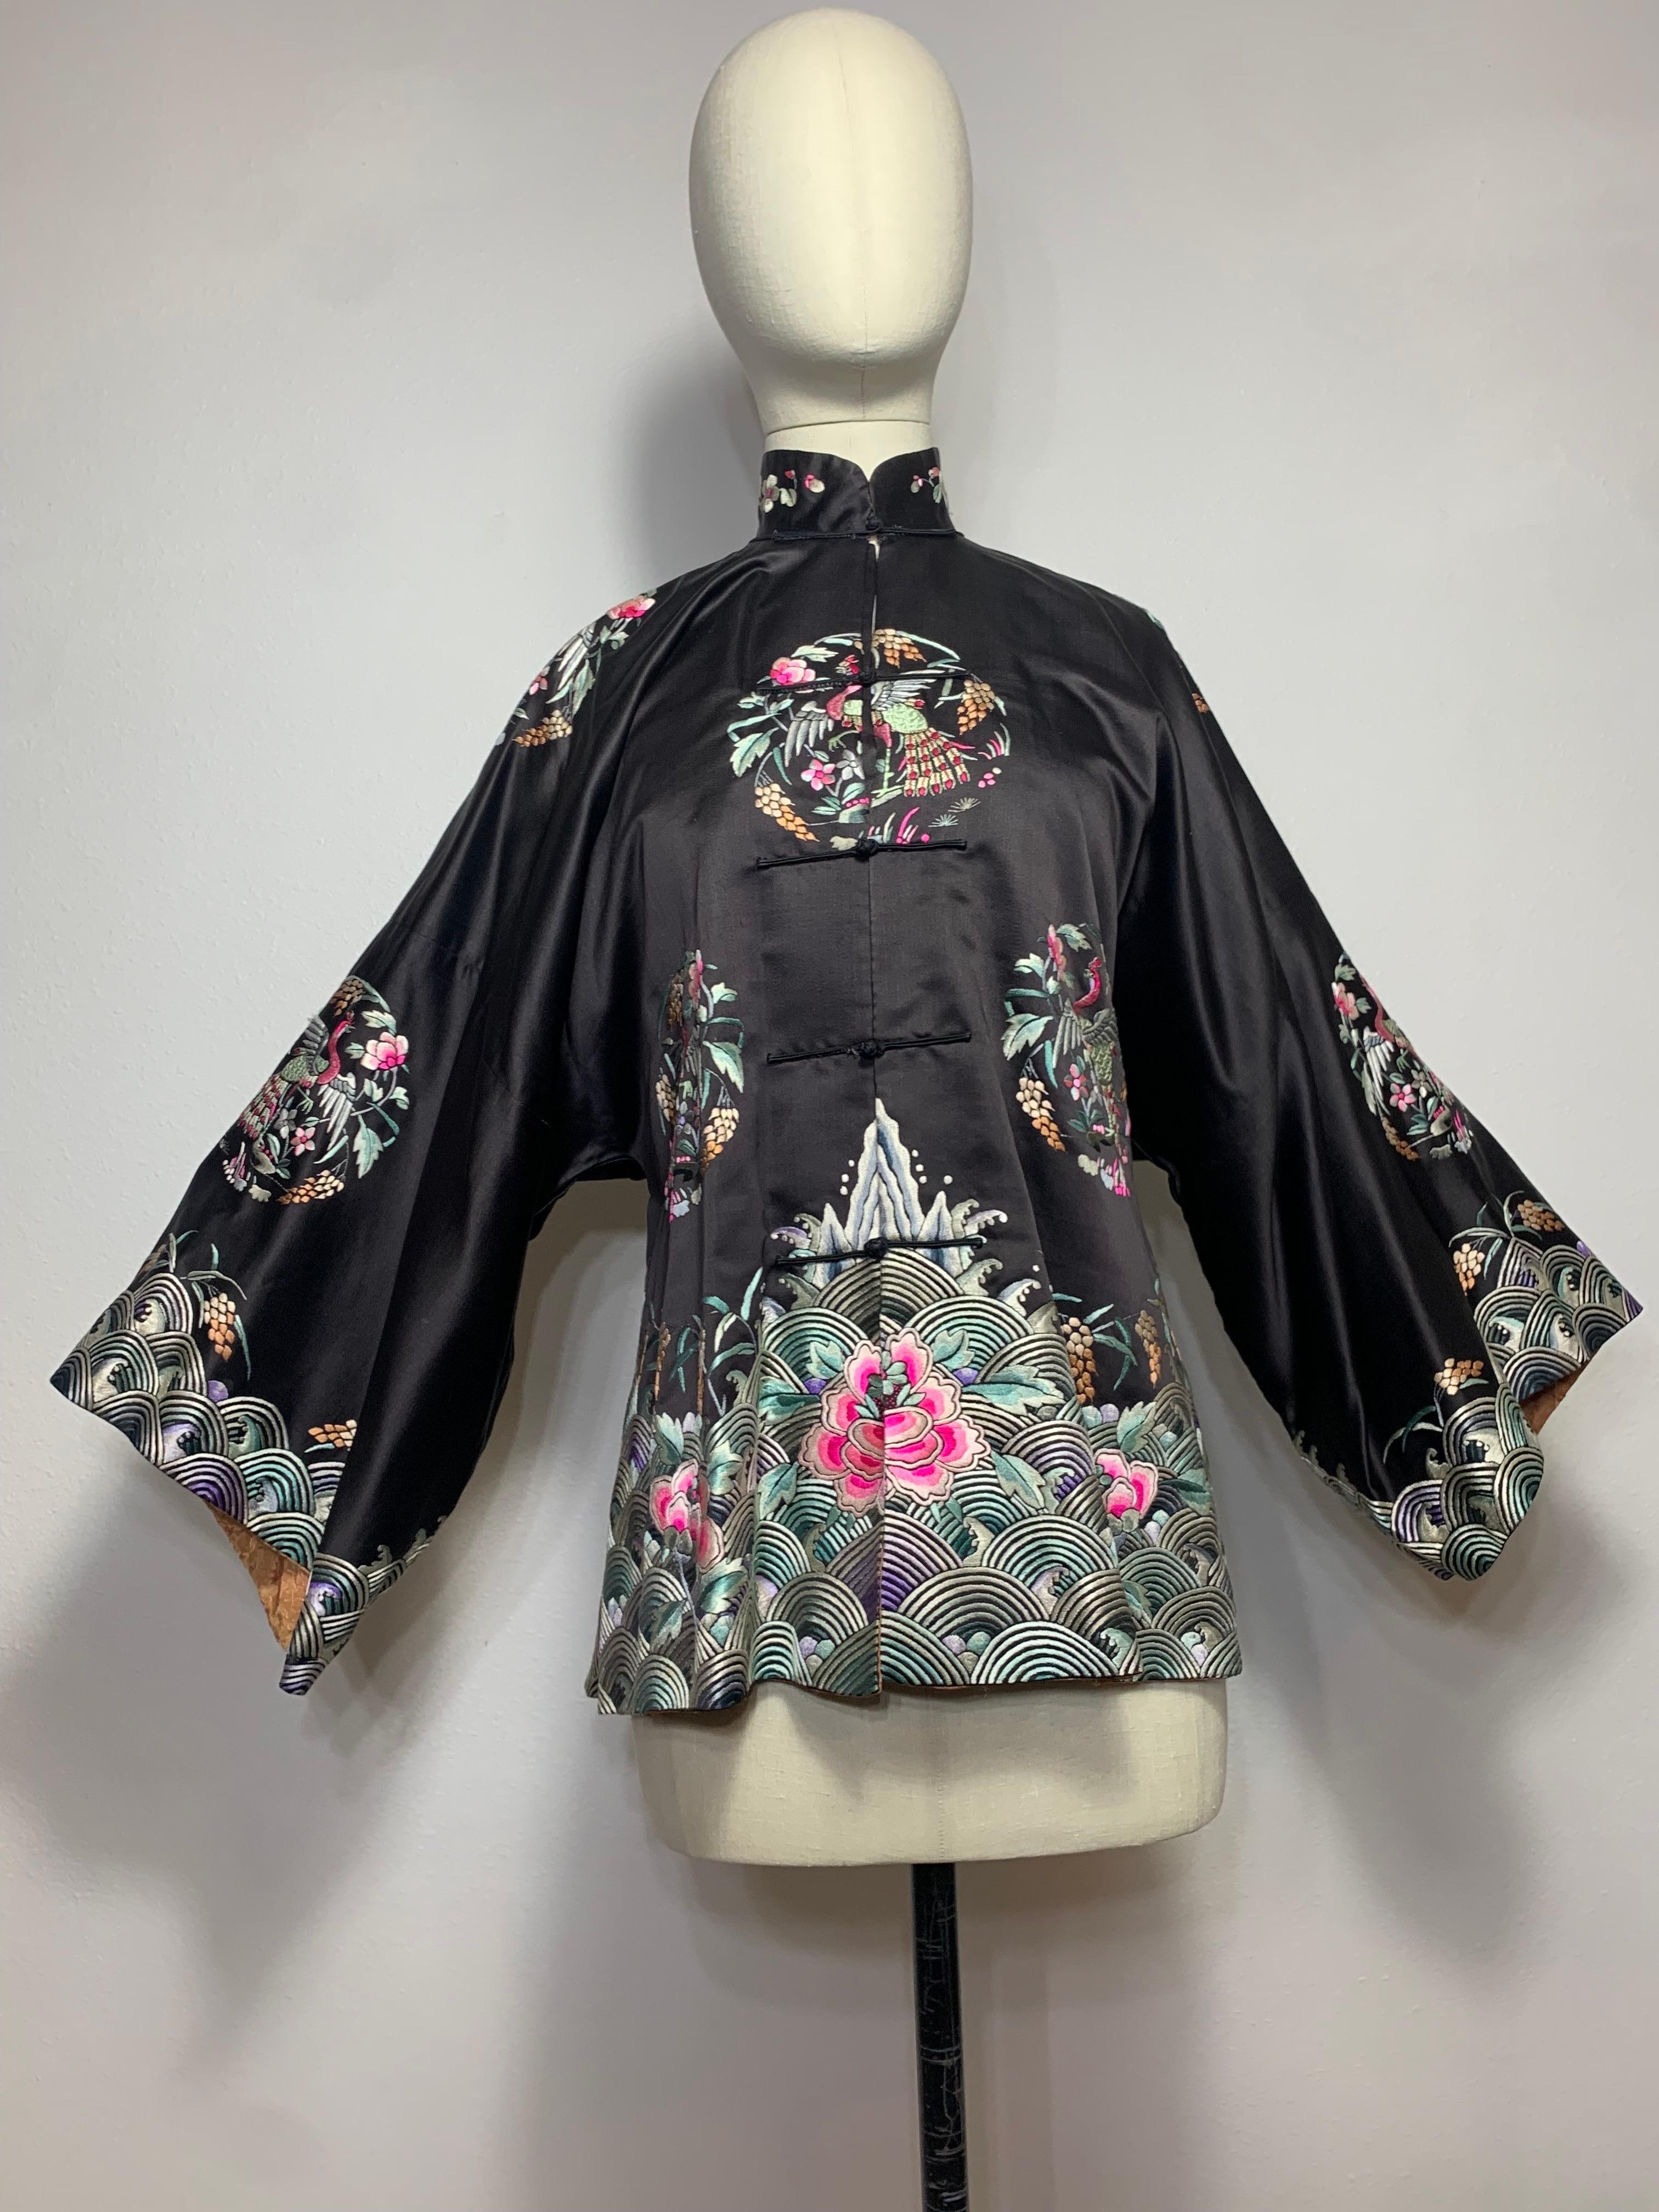 1920s Black Silk Satin Chinese Traditional Jacket w Colorful Hand Embroidery:  Nehru collar and satin frogs down front to close this beautifully hand embroidered bird motifs in pink, lavender and pale green decorate this traditional robe style